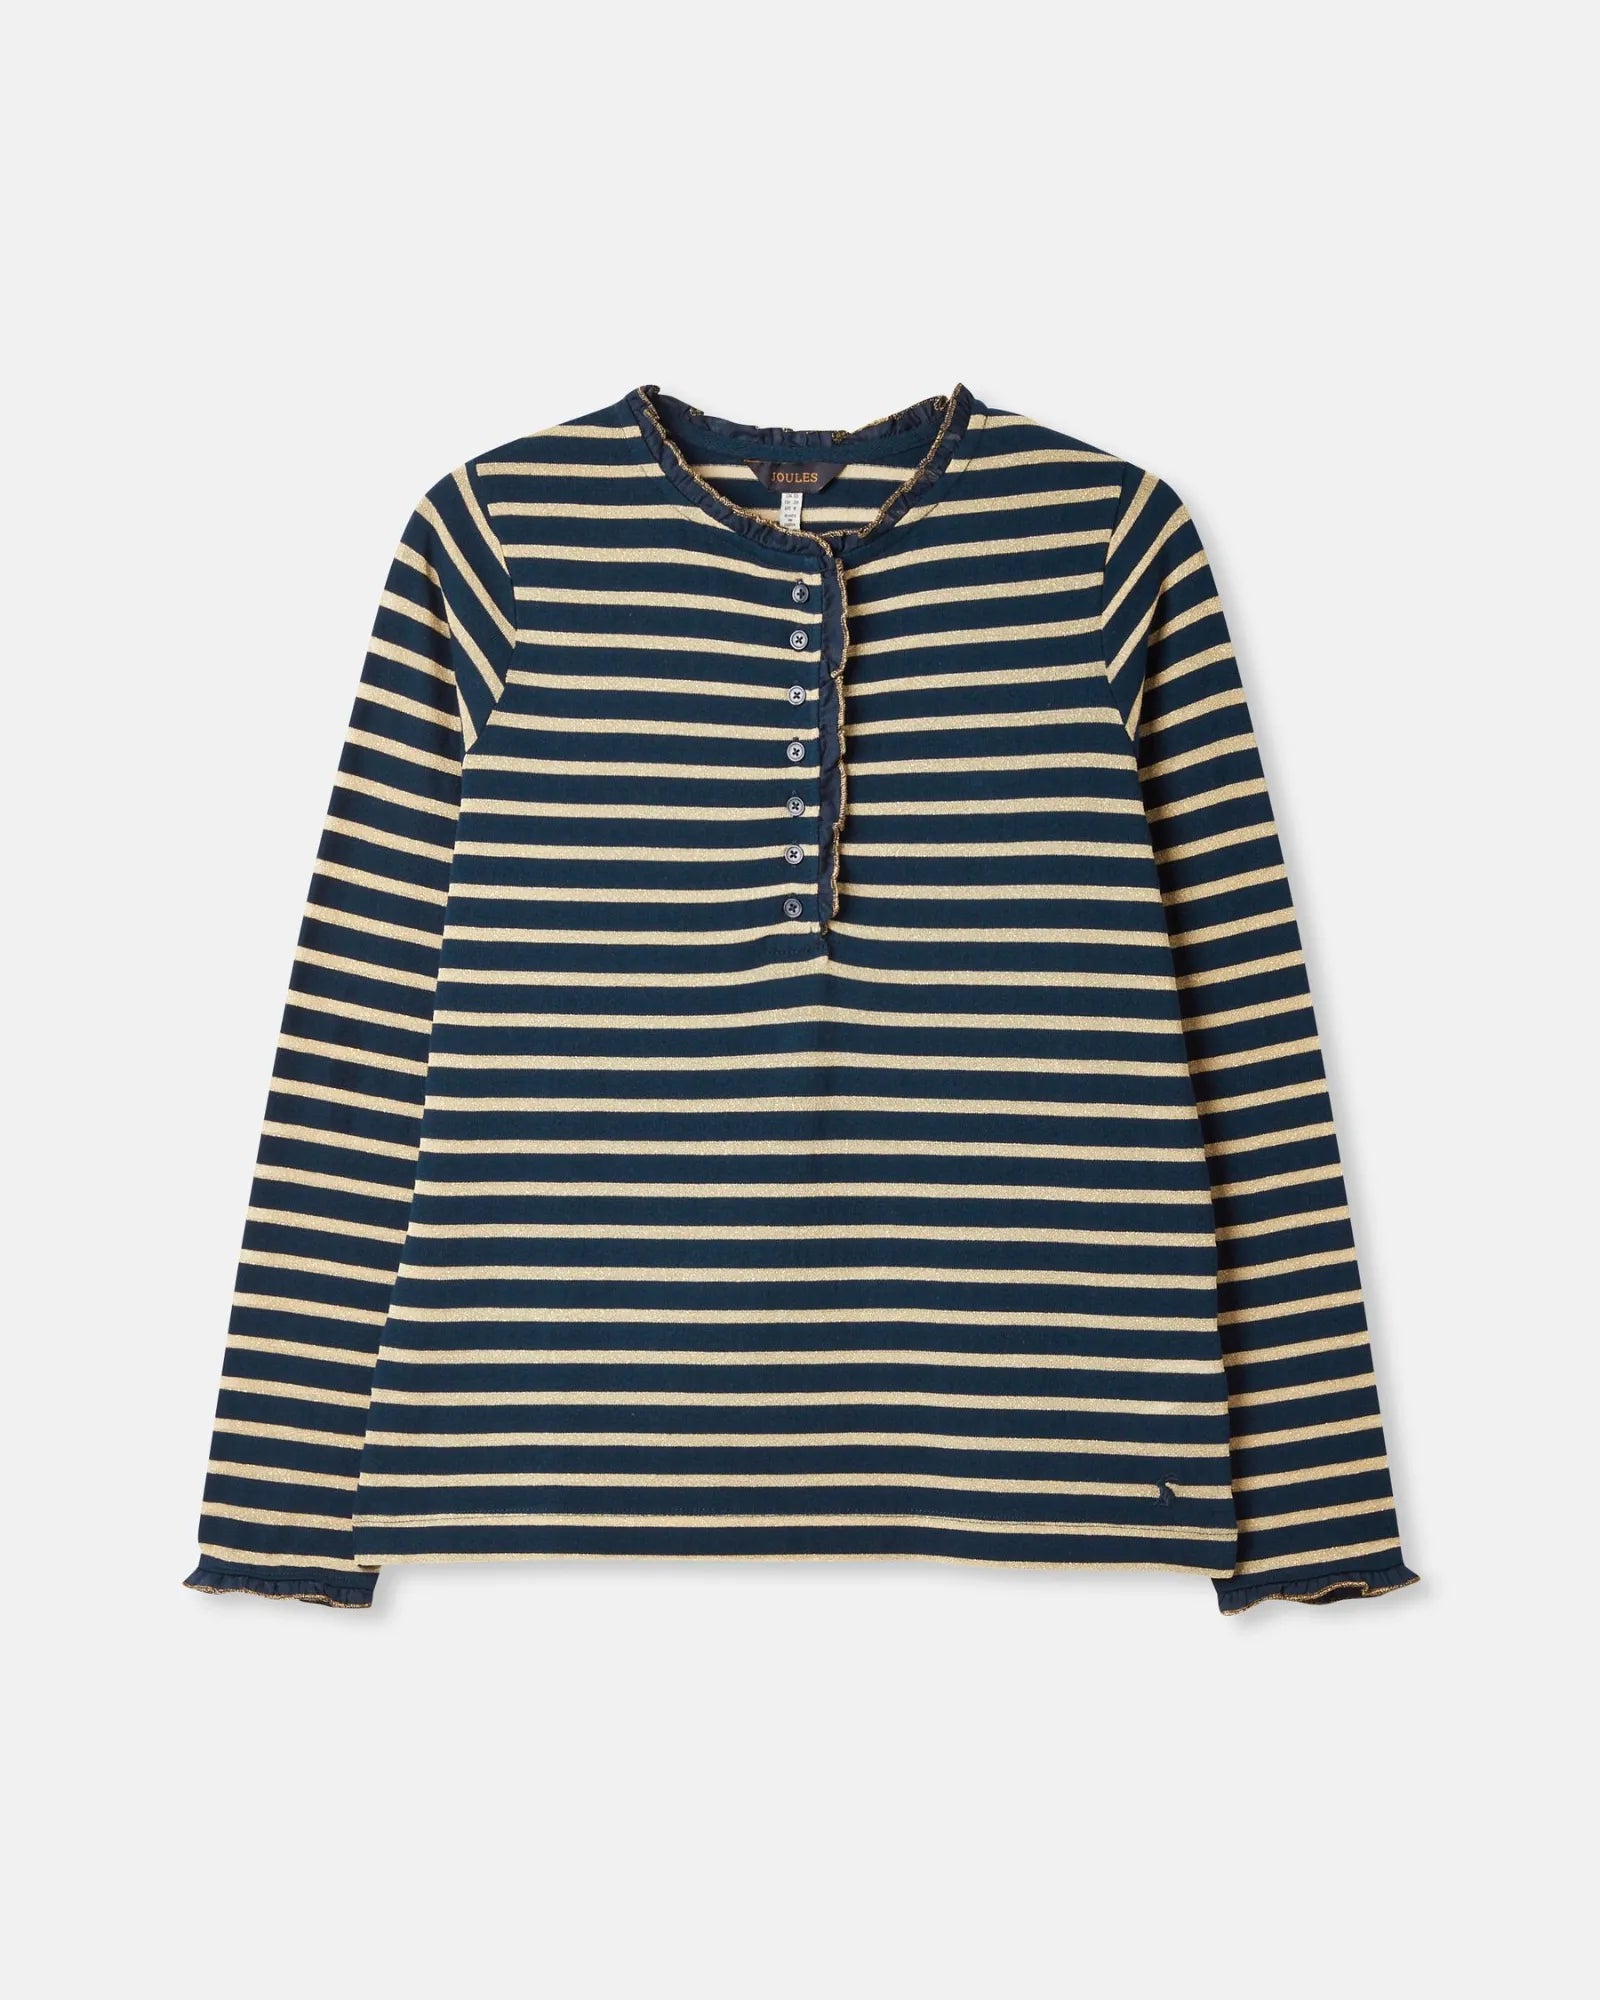 Daphne Navy Striped Top with Frilled Detailing